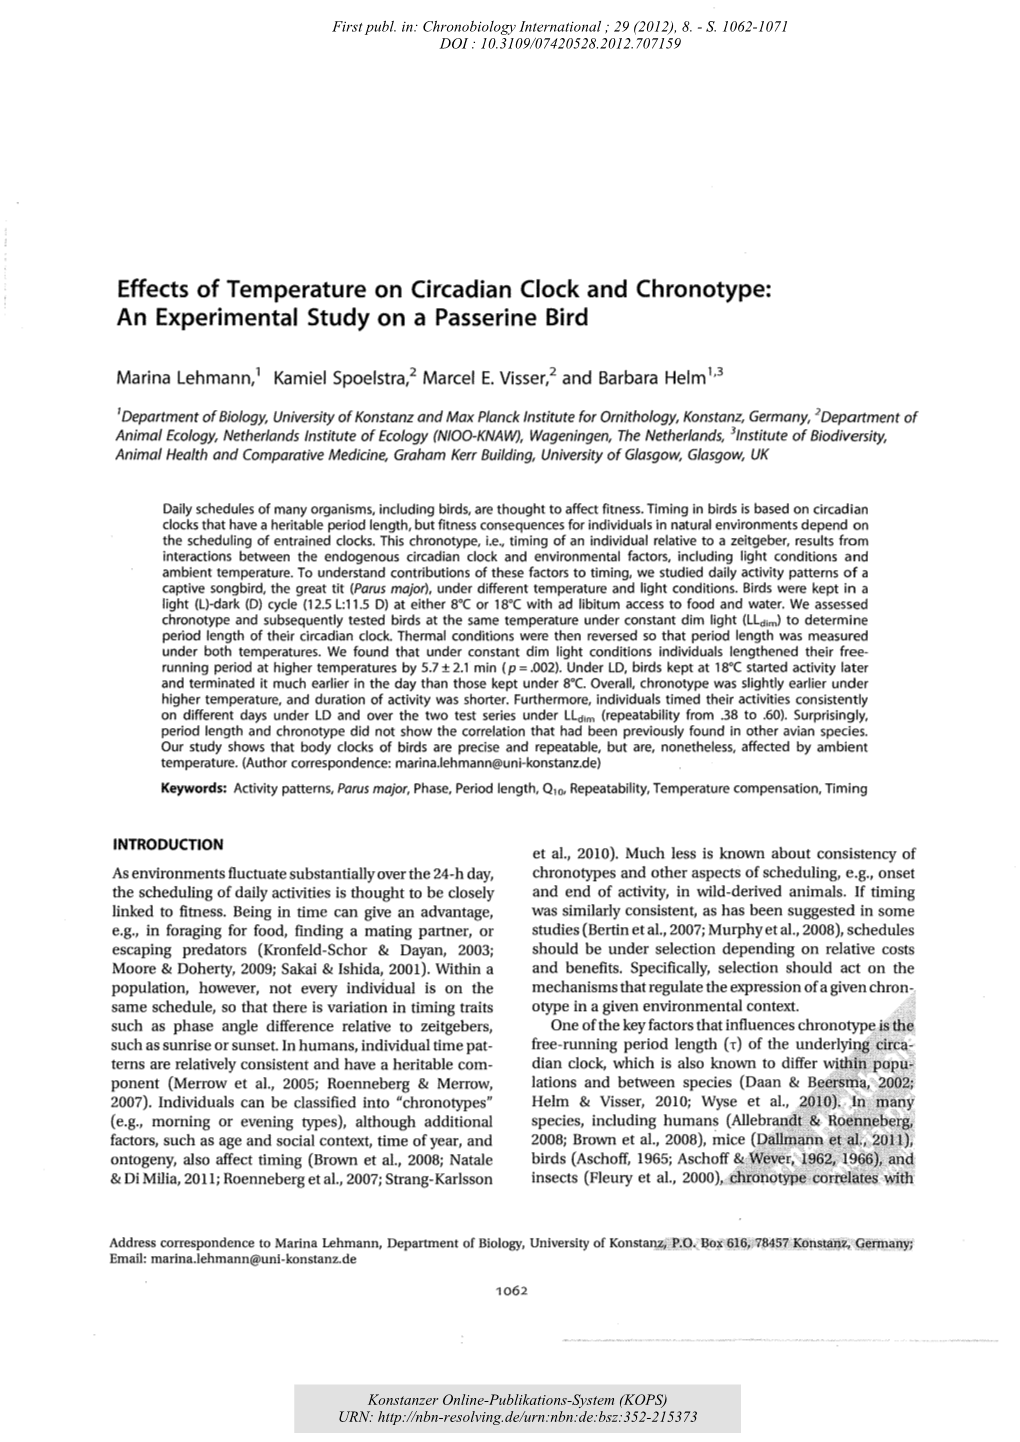 Effects of Temperature on Circadian Clock and Chronotype: an Experimental Study on a Passerine Bird